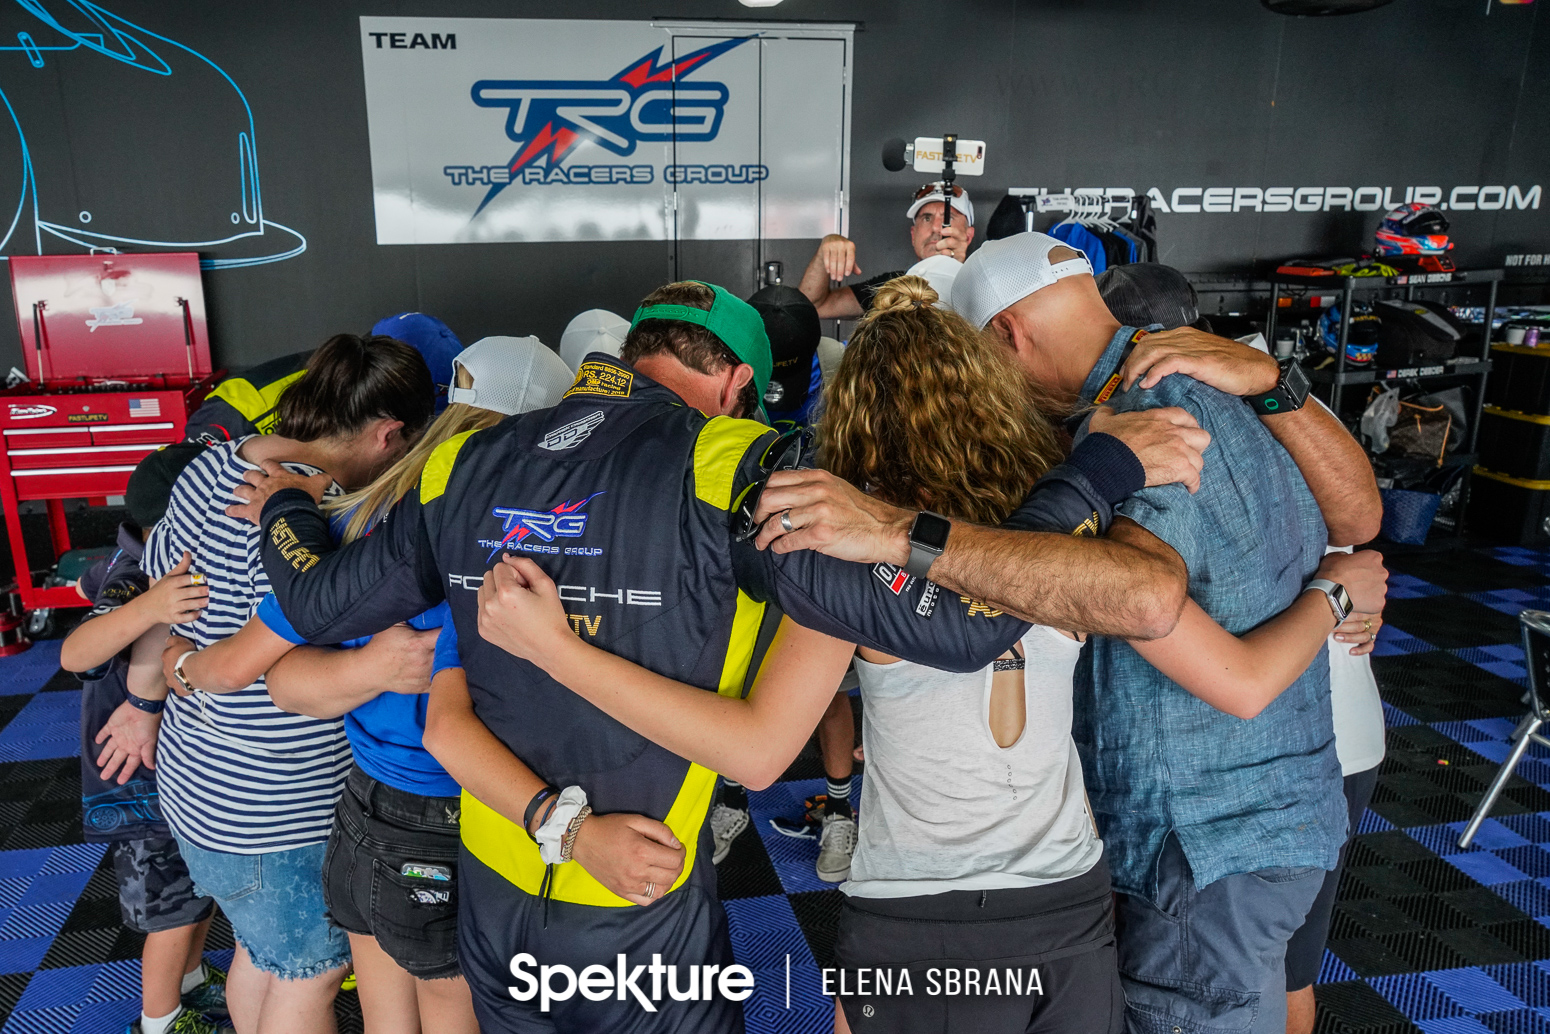 Earchphoto - TRG Team huddle before a race. 